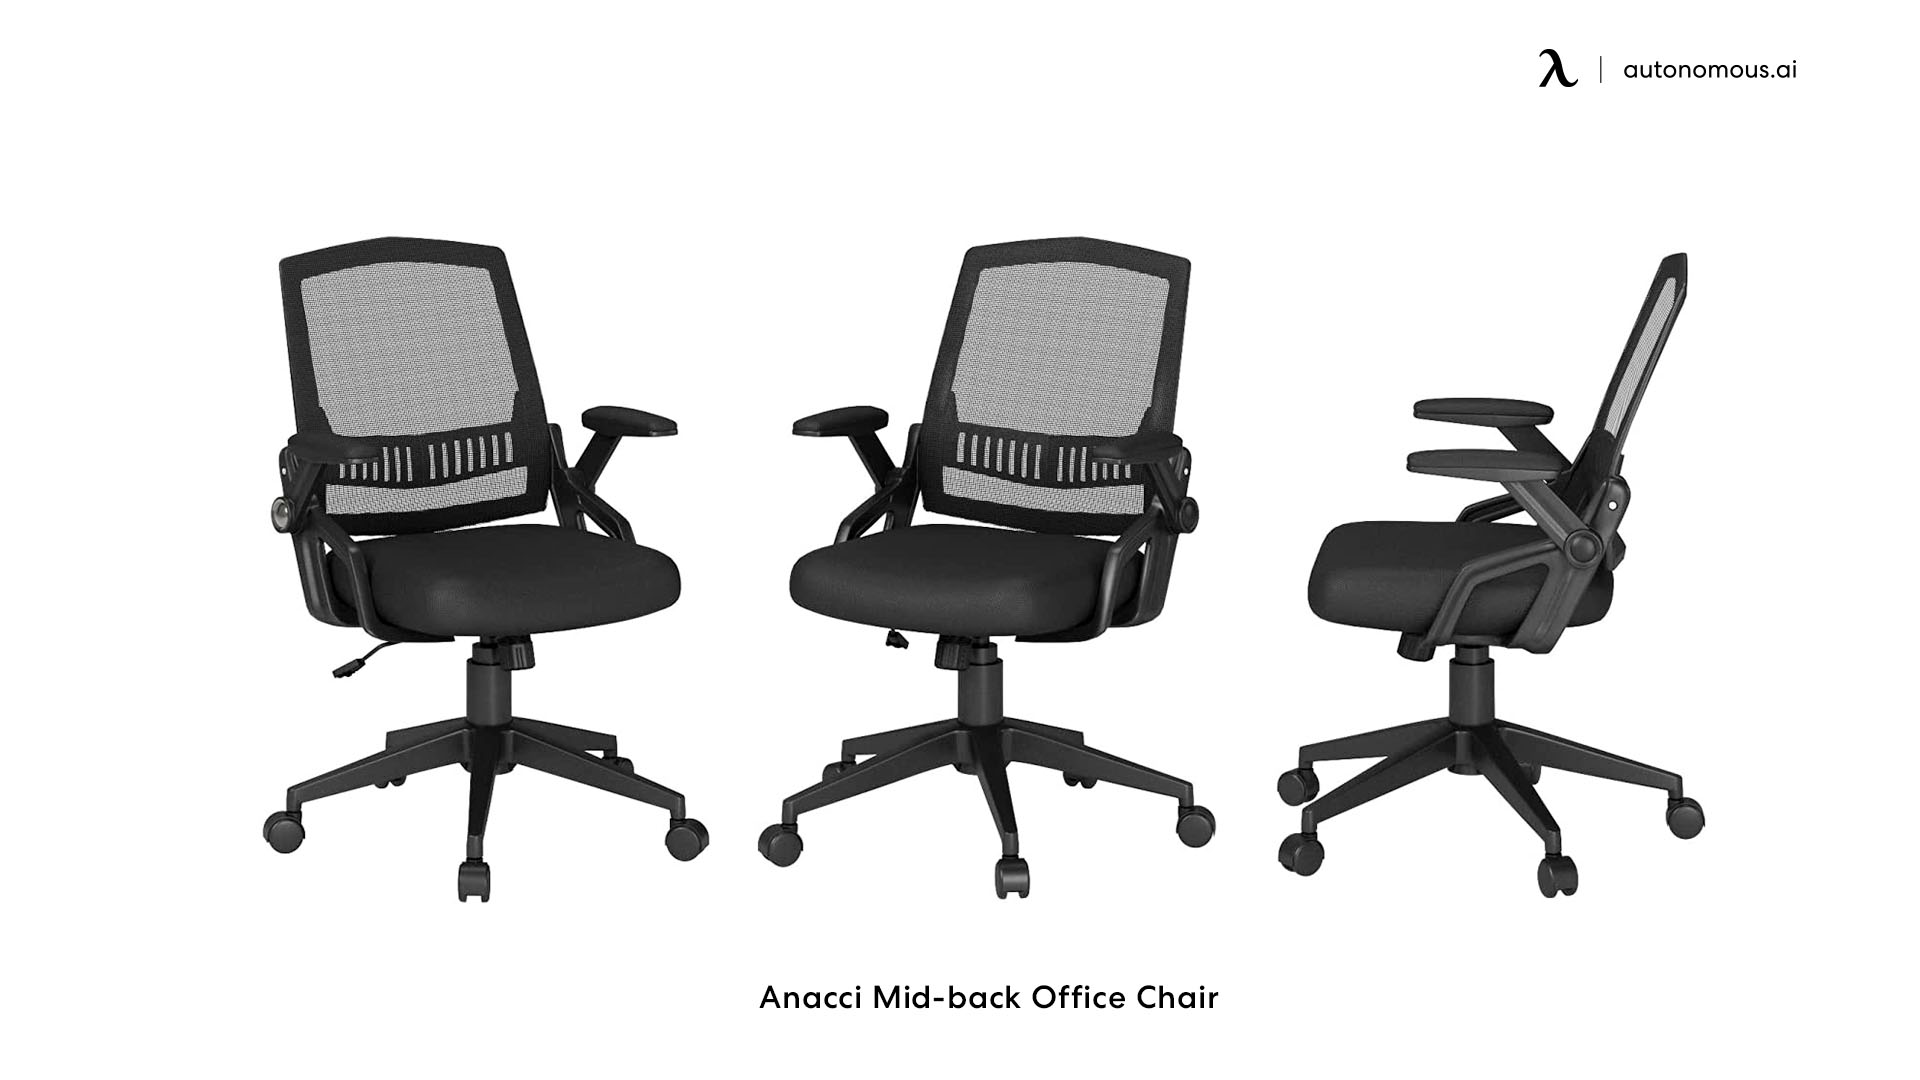 Anacci Mid-back sturdy office chairs